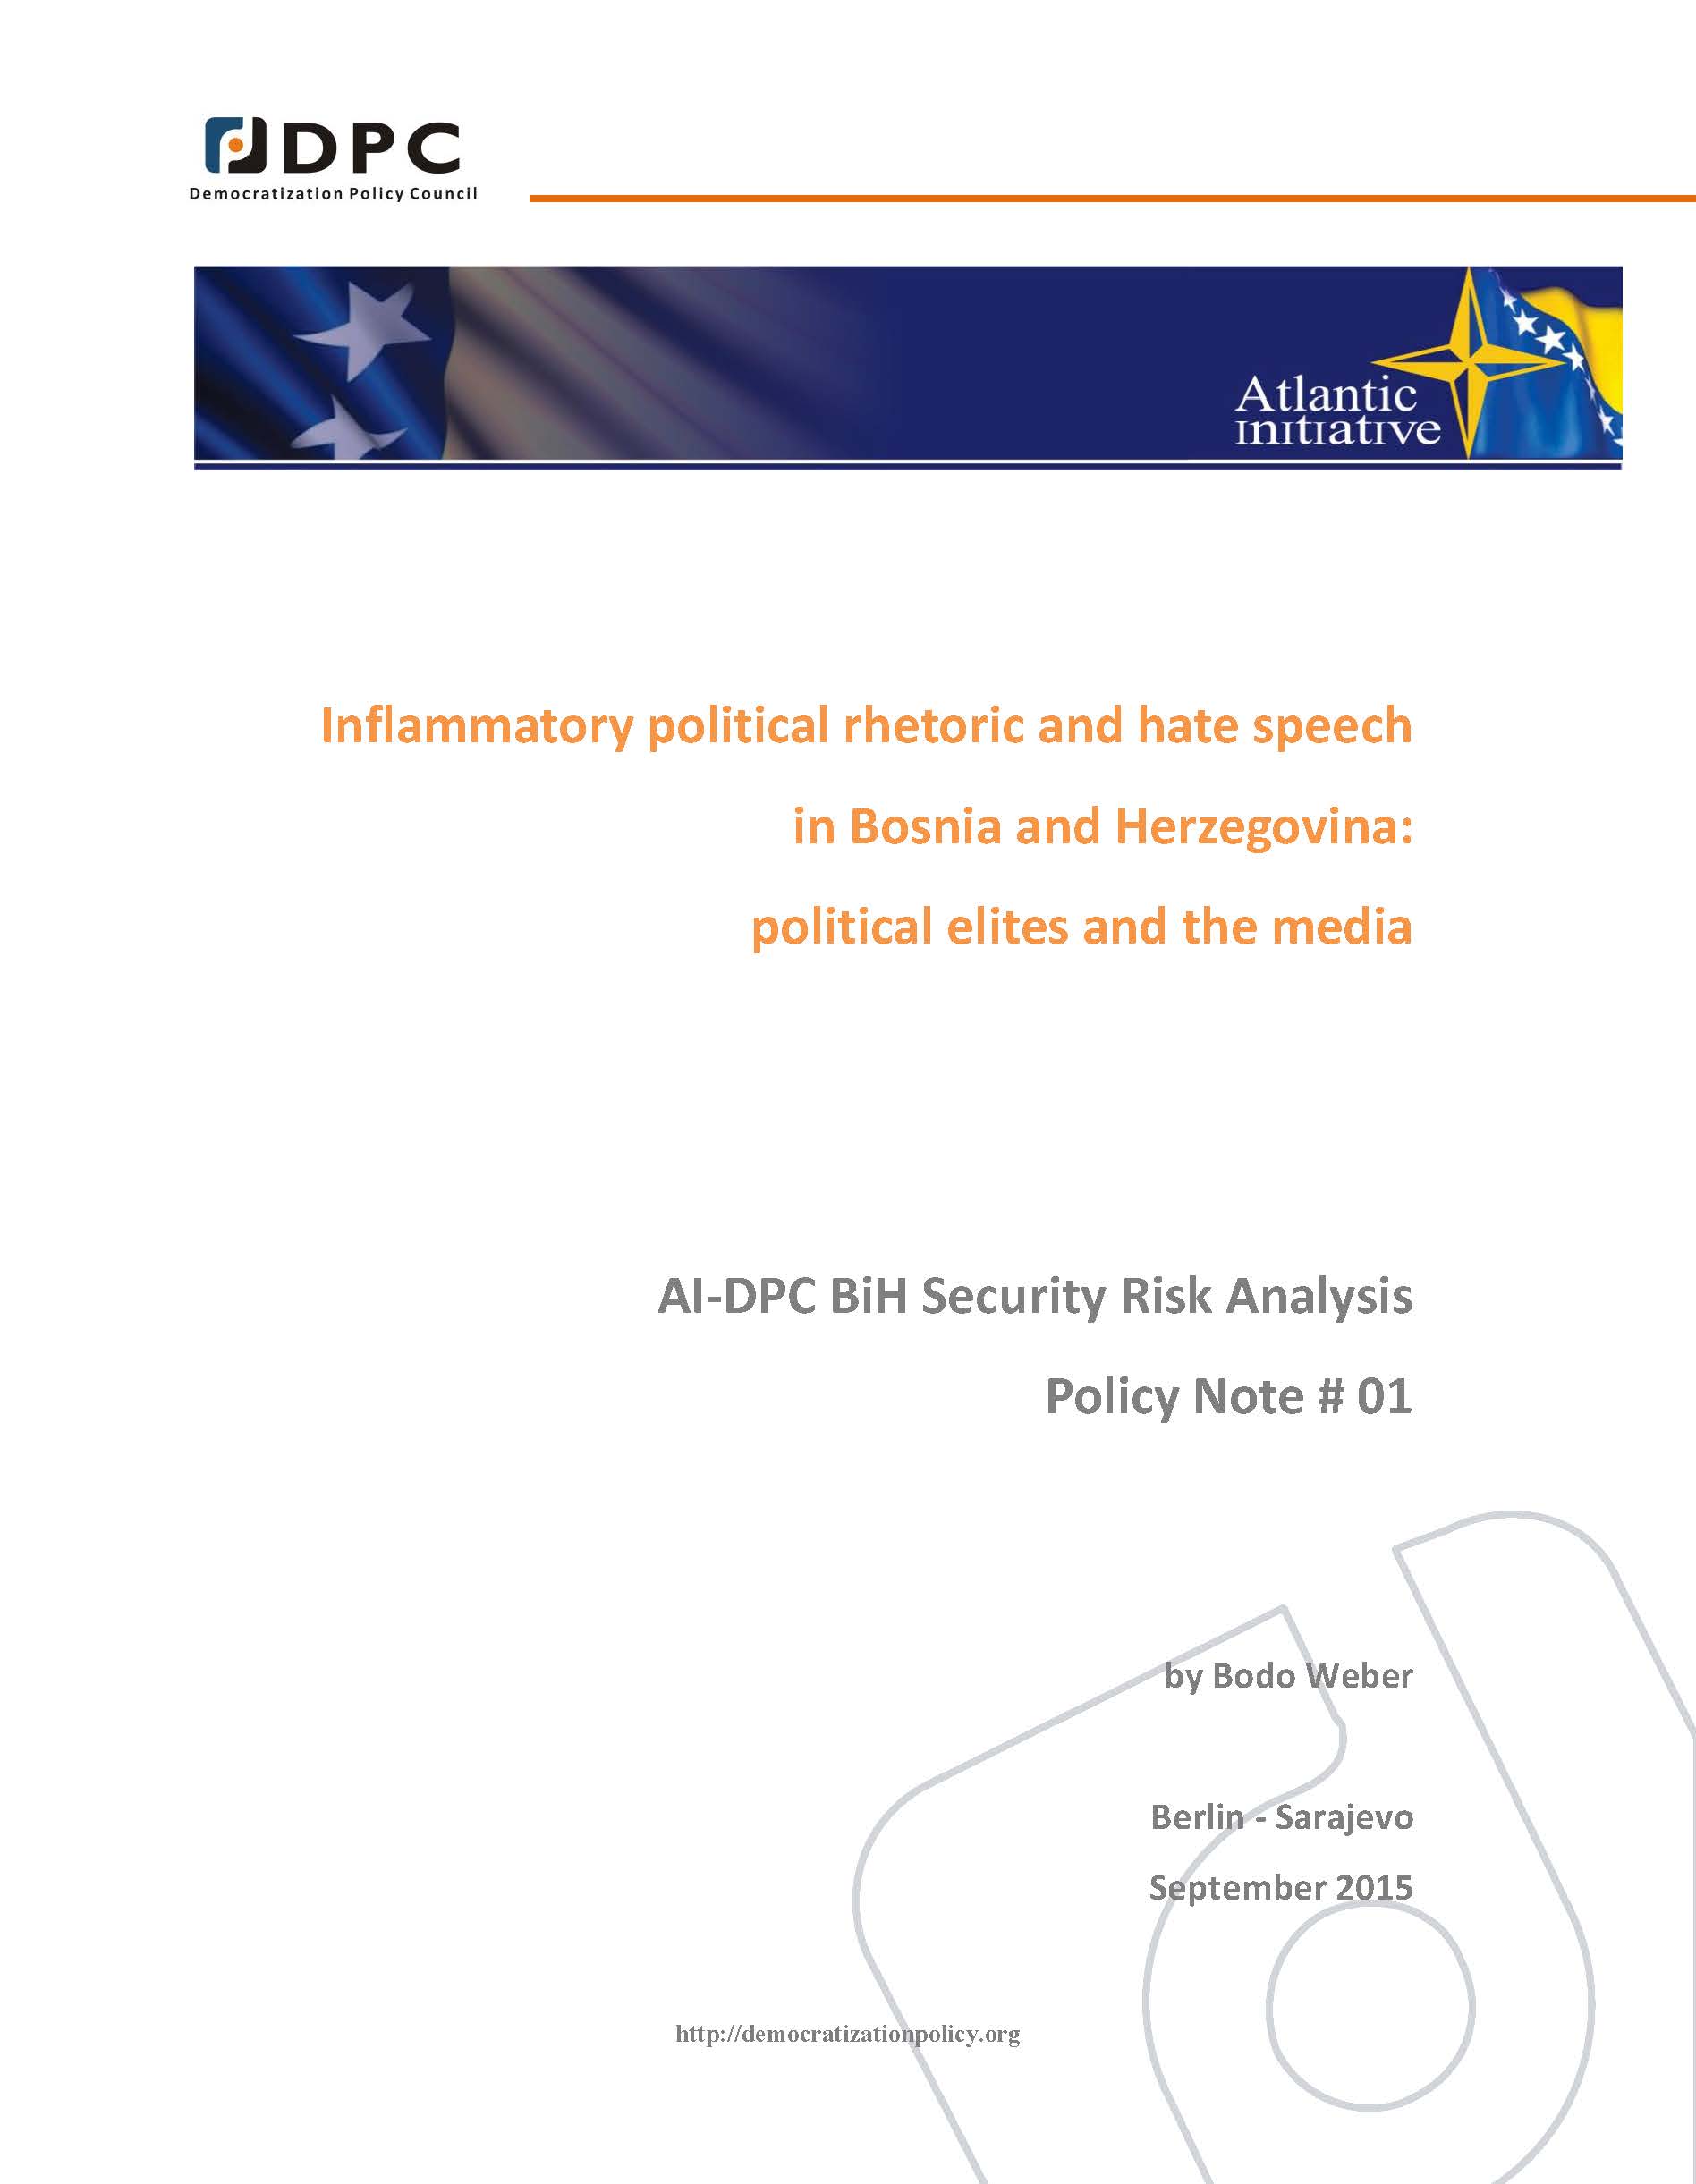 AI-DPC BiH SECURITY ANALYSIS POLICY NOTE 01: Inflammatory political rhetoric and hate speech in Bosnia and Herzegovina: political elites and the media